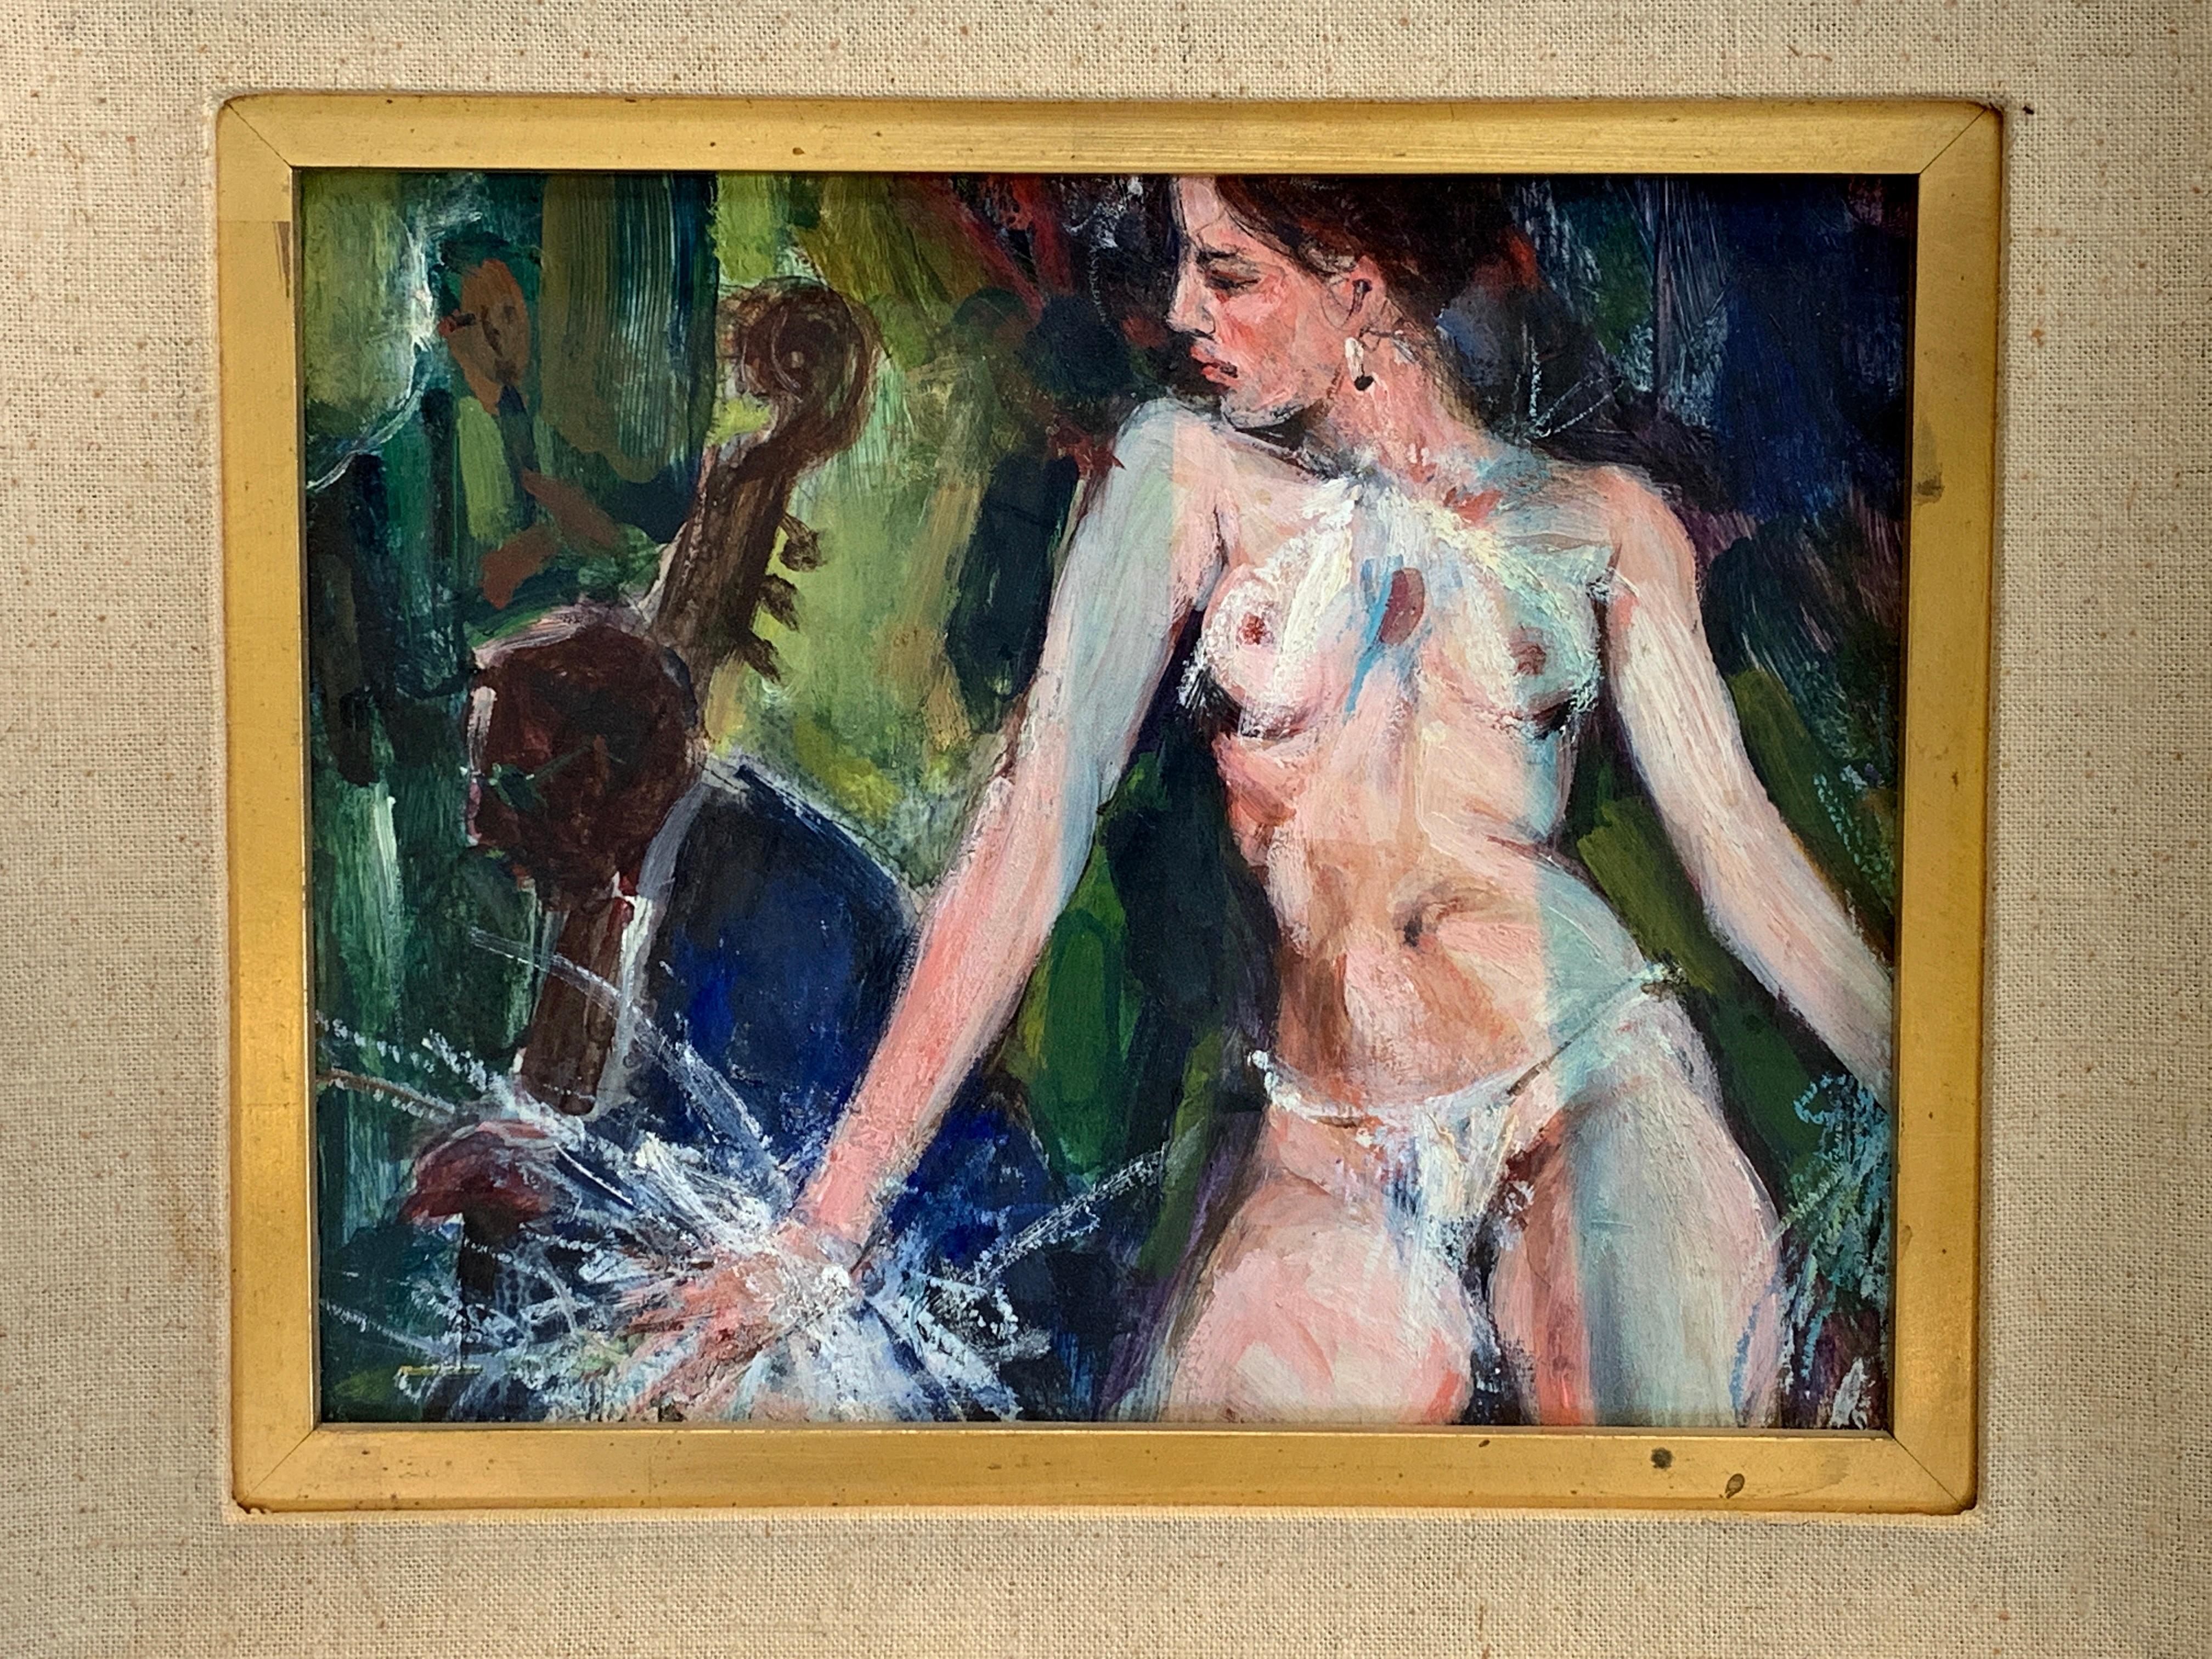 A nice nude oil on board by the noted Illinois artist Walter Moskow. It is titled 